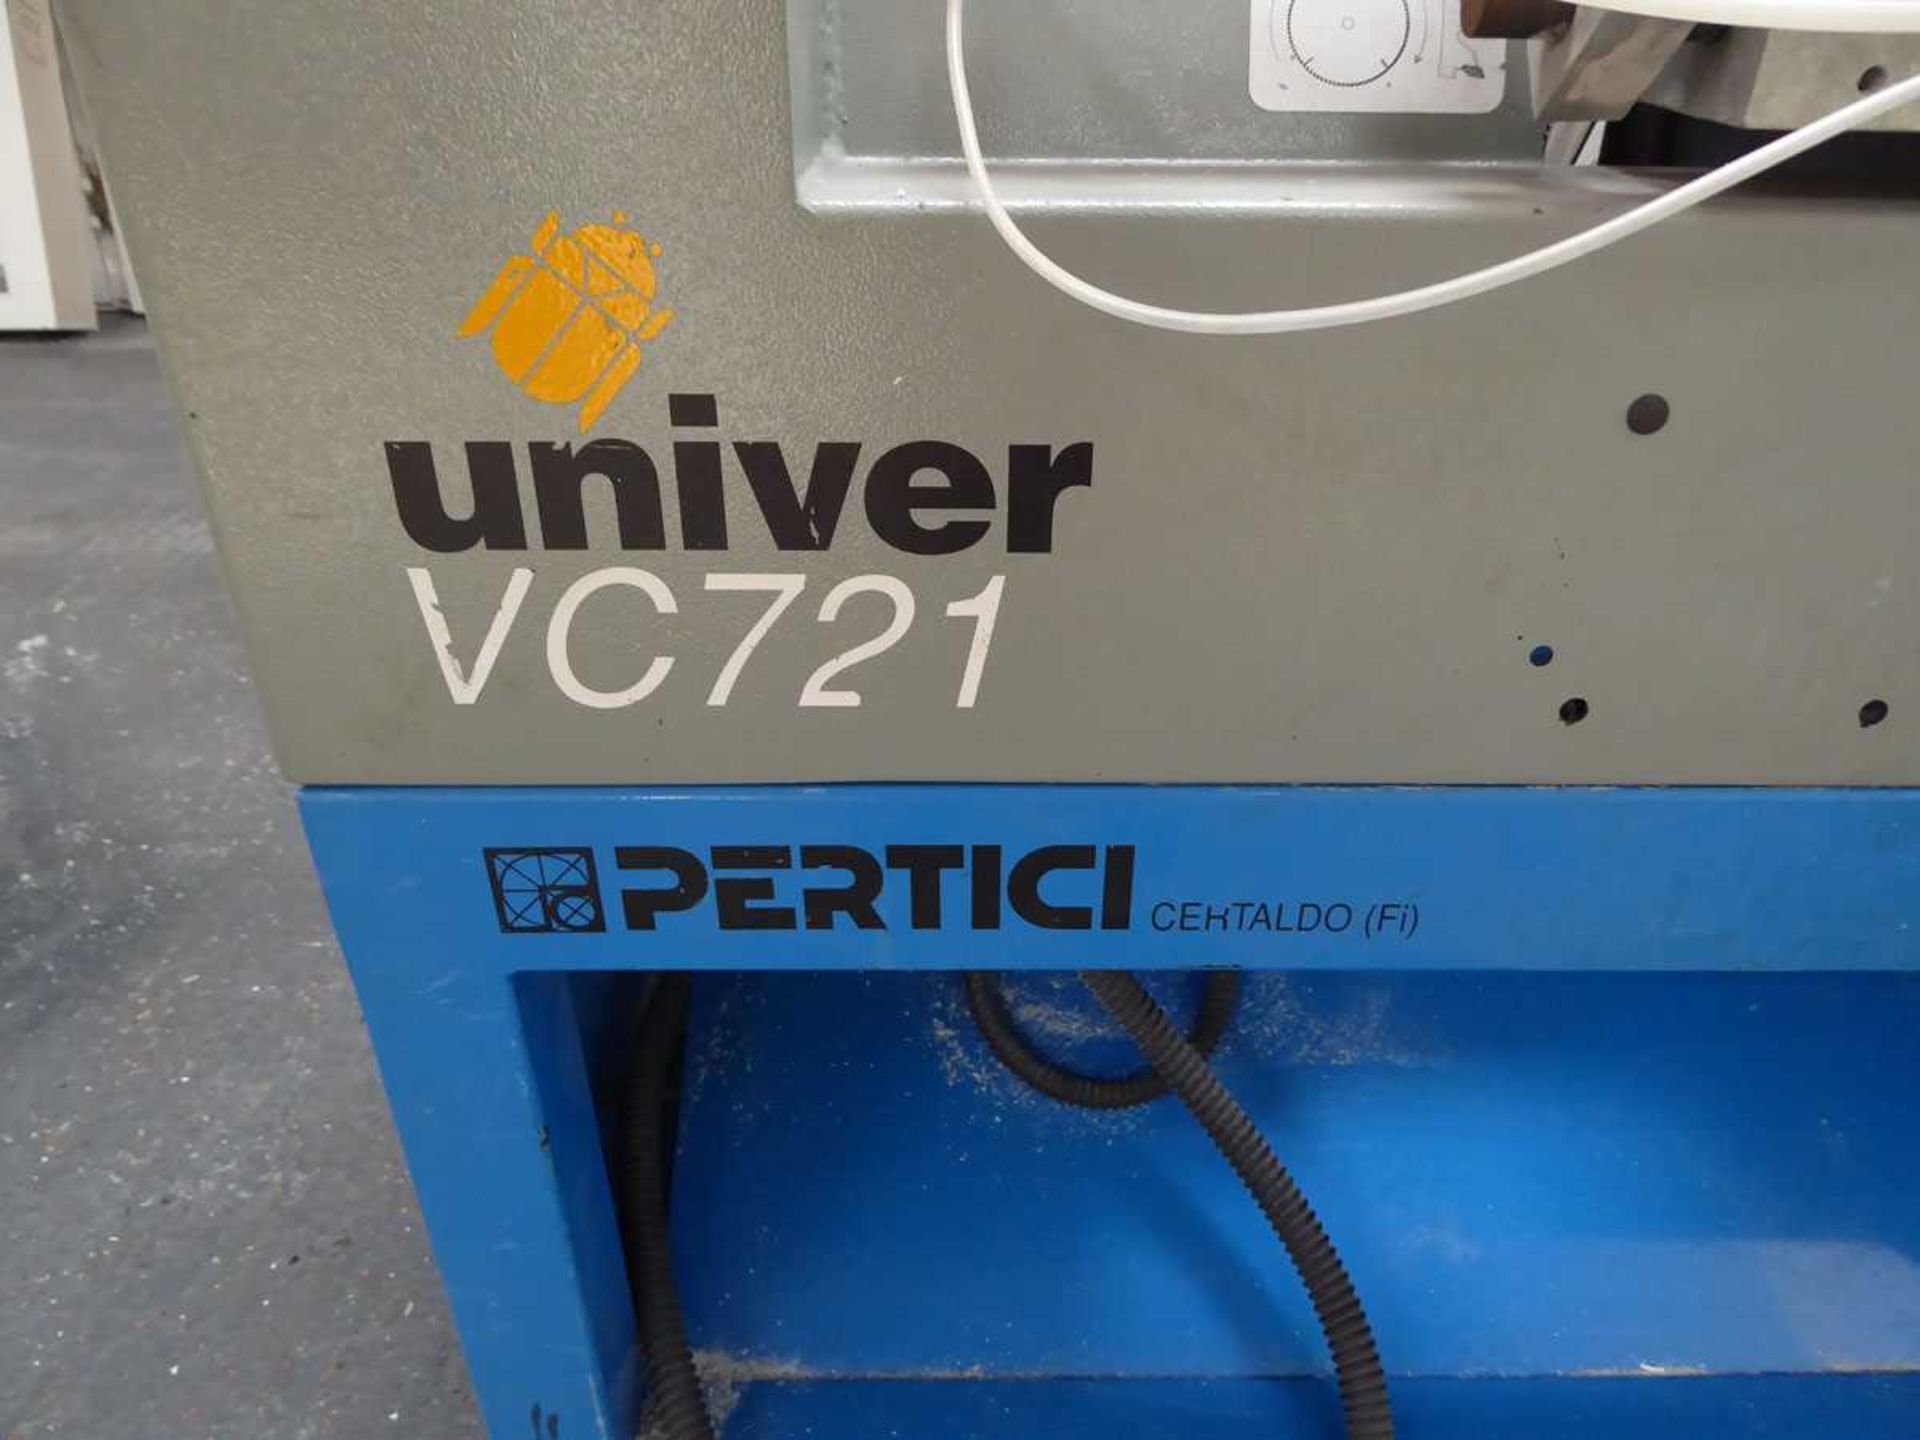 Pertici Univer VC721 semi automatic v-cutting machine, serial no. 03V209, 3 phase electric, year - Image 2 of 5